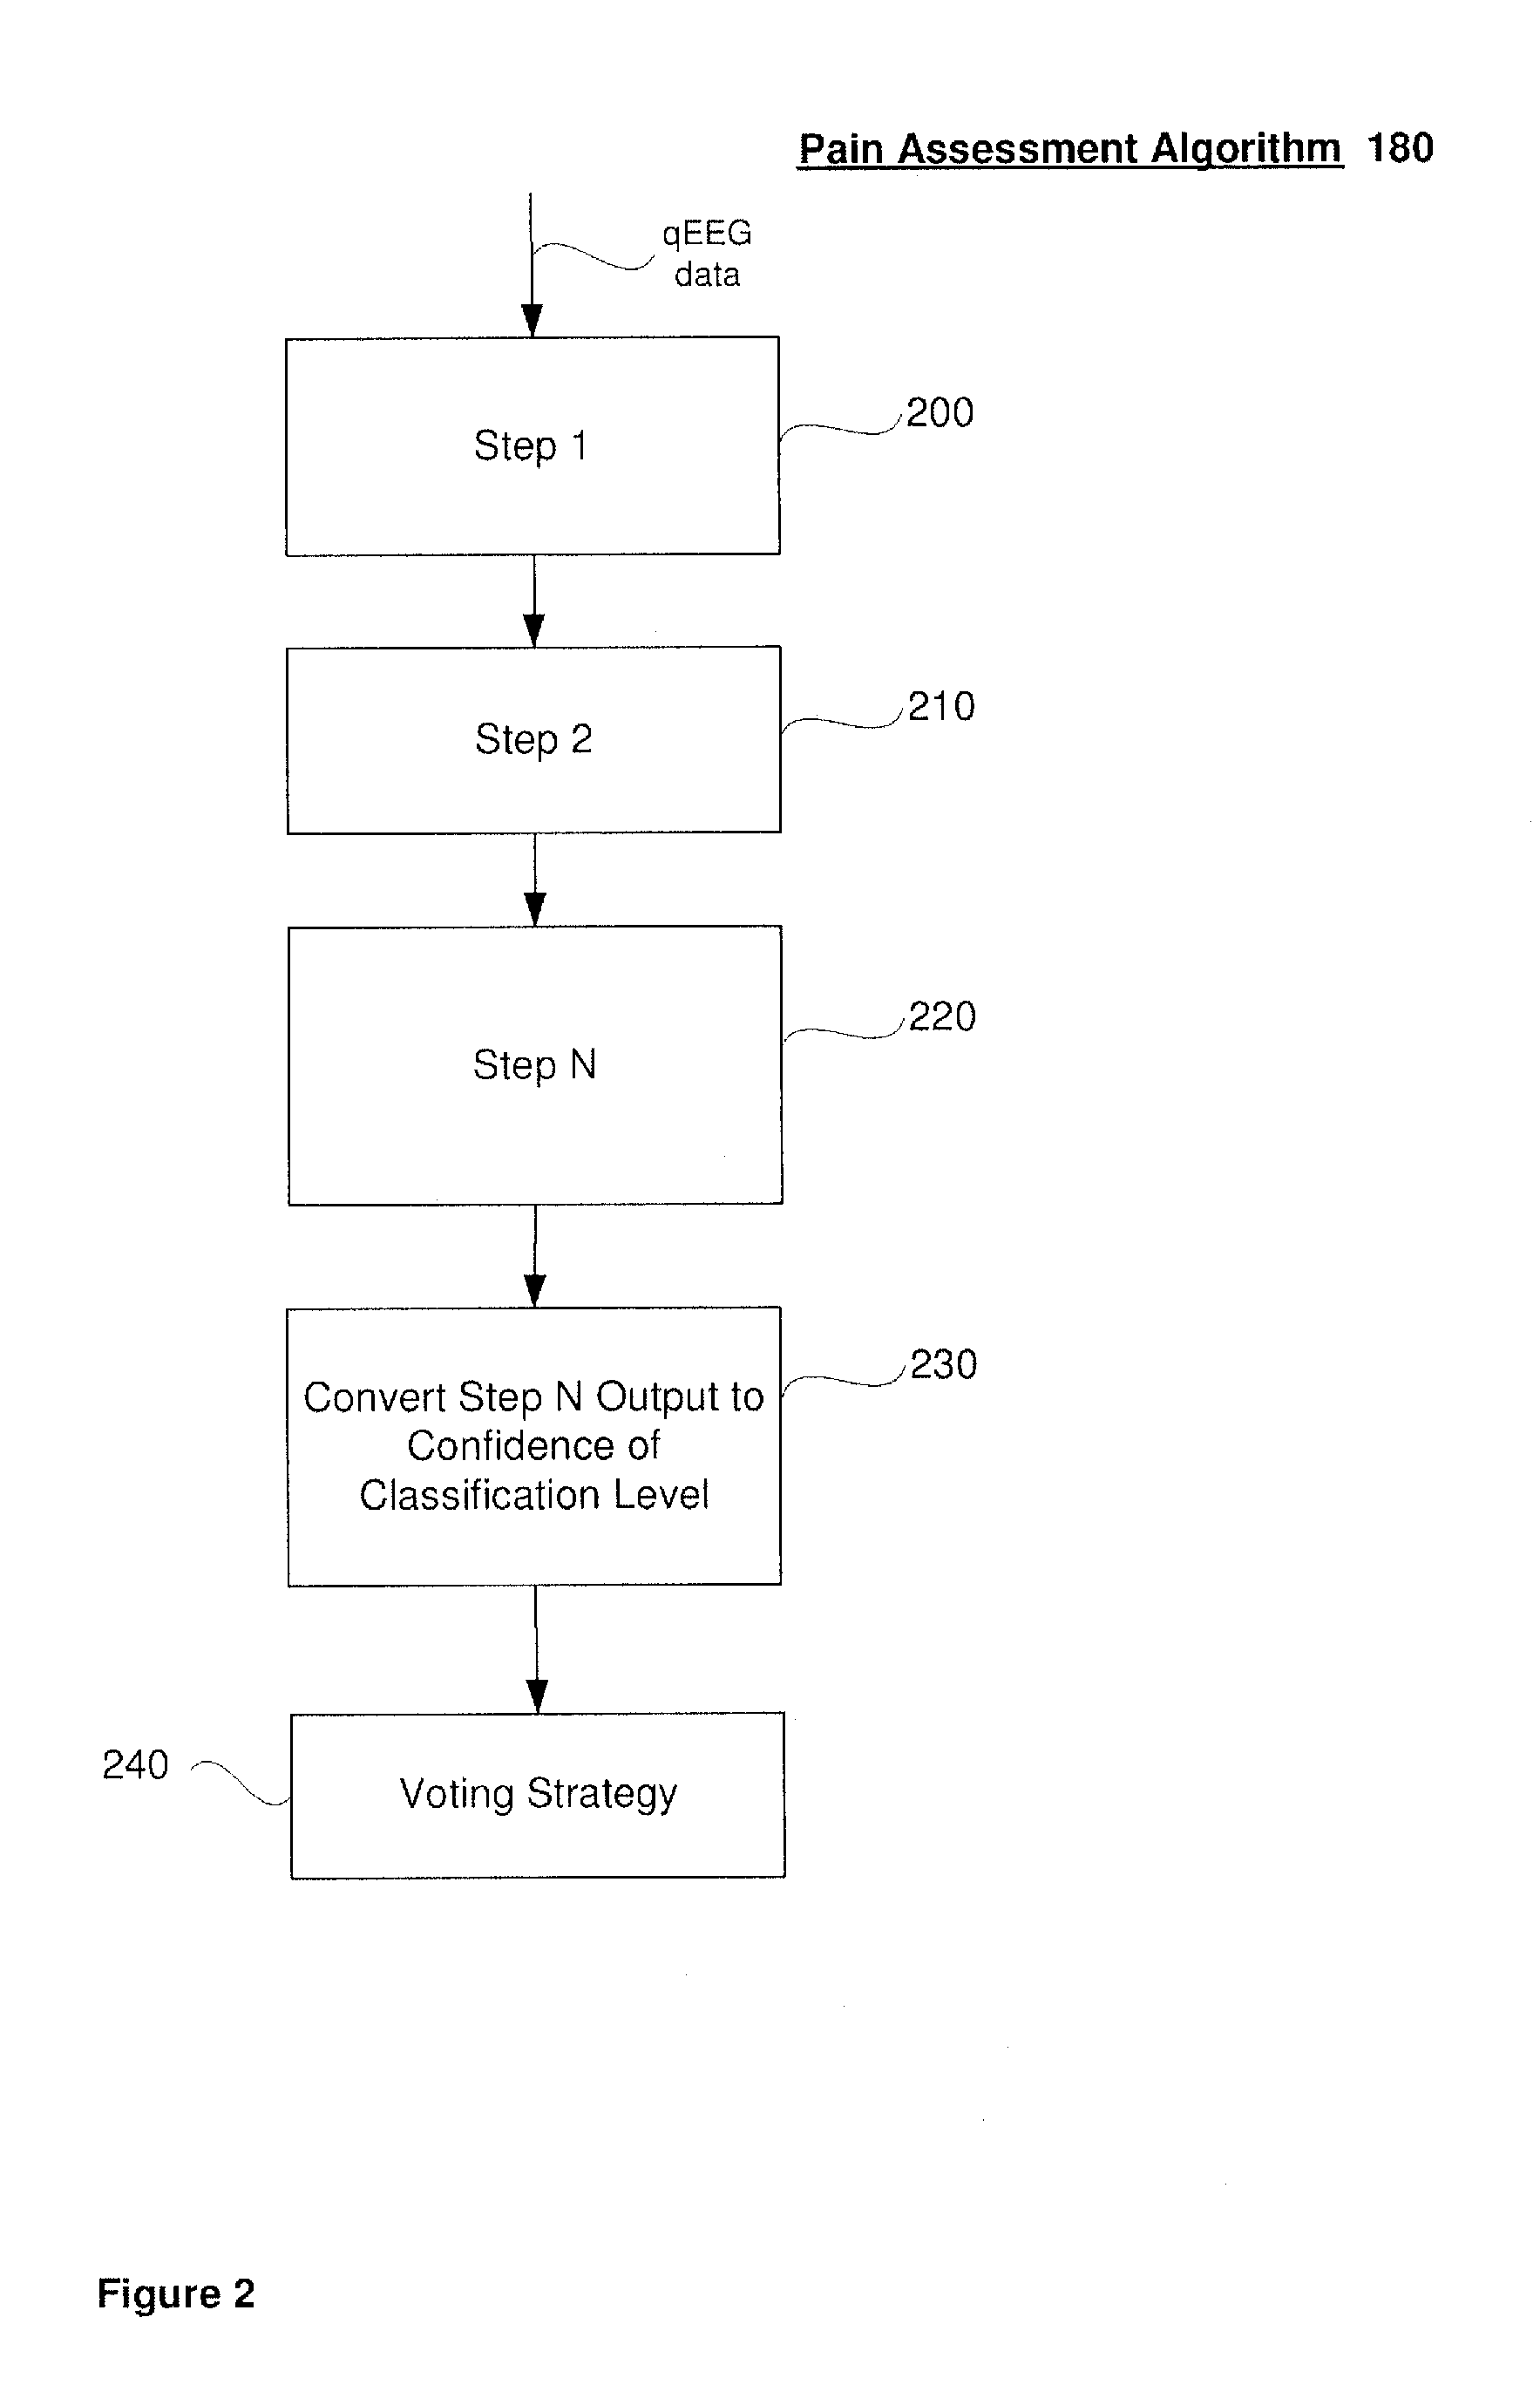 System and method for pain detection and computation of a pain quantification index